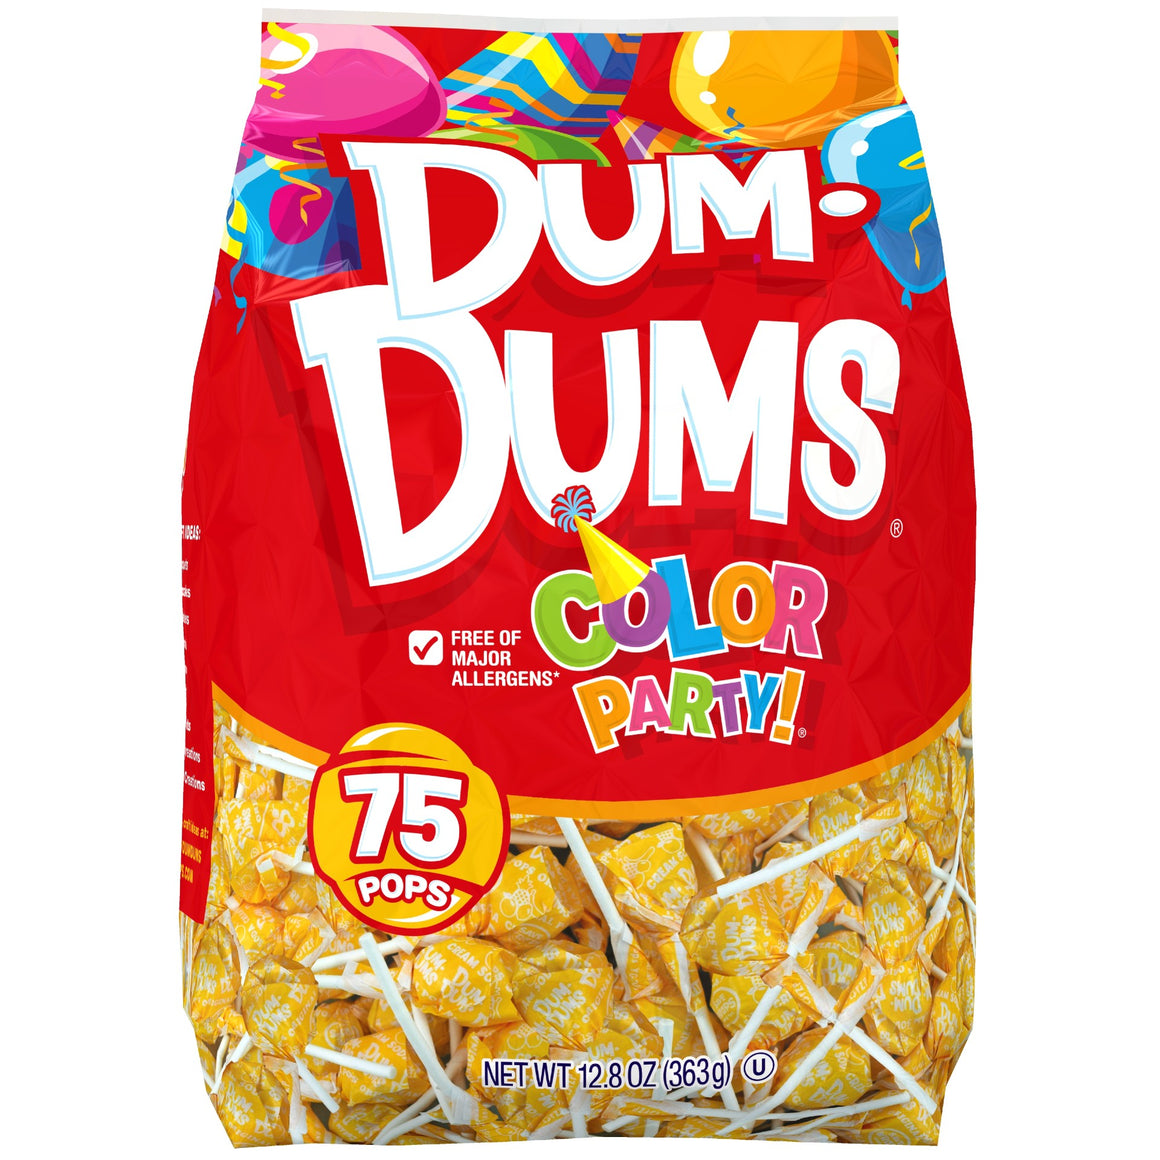 All City Candy Dum Dums Color Party Yellow Cream Soda Lollipops - Bag of 75 Lollipops & Suckers Spangler For fresh candy and great service, visit www.allcitycandy.com